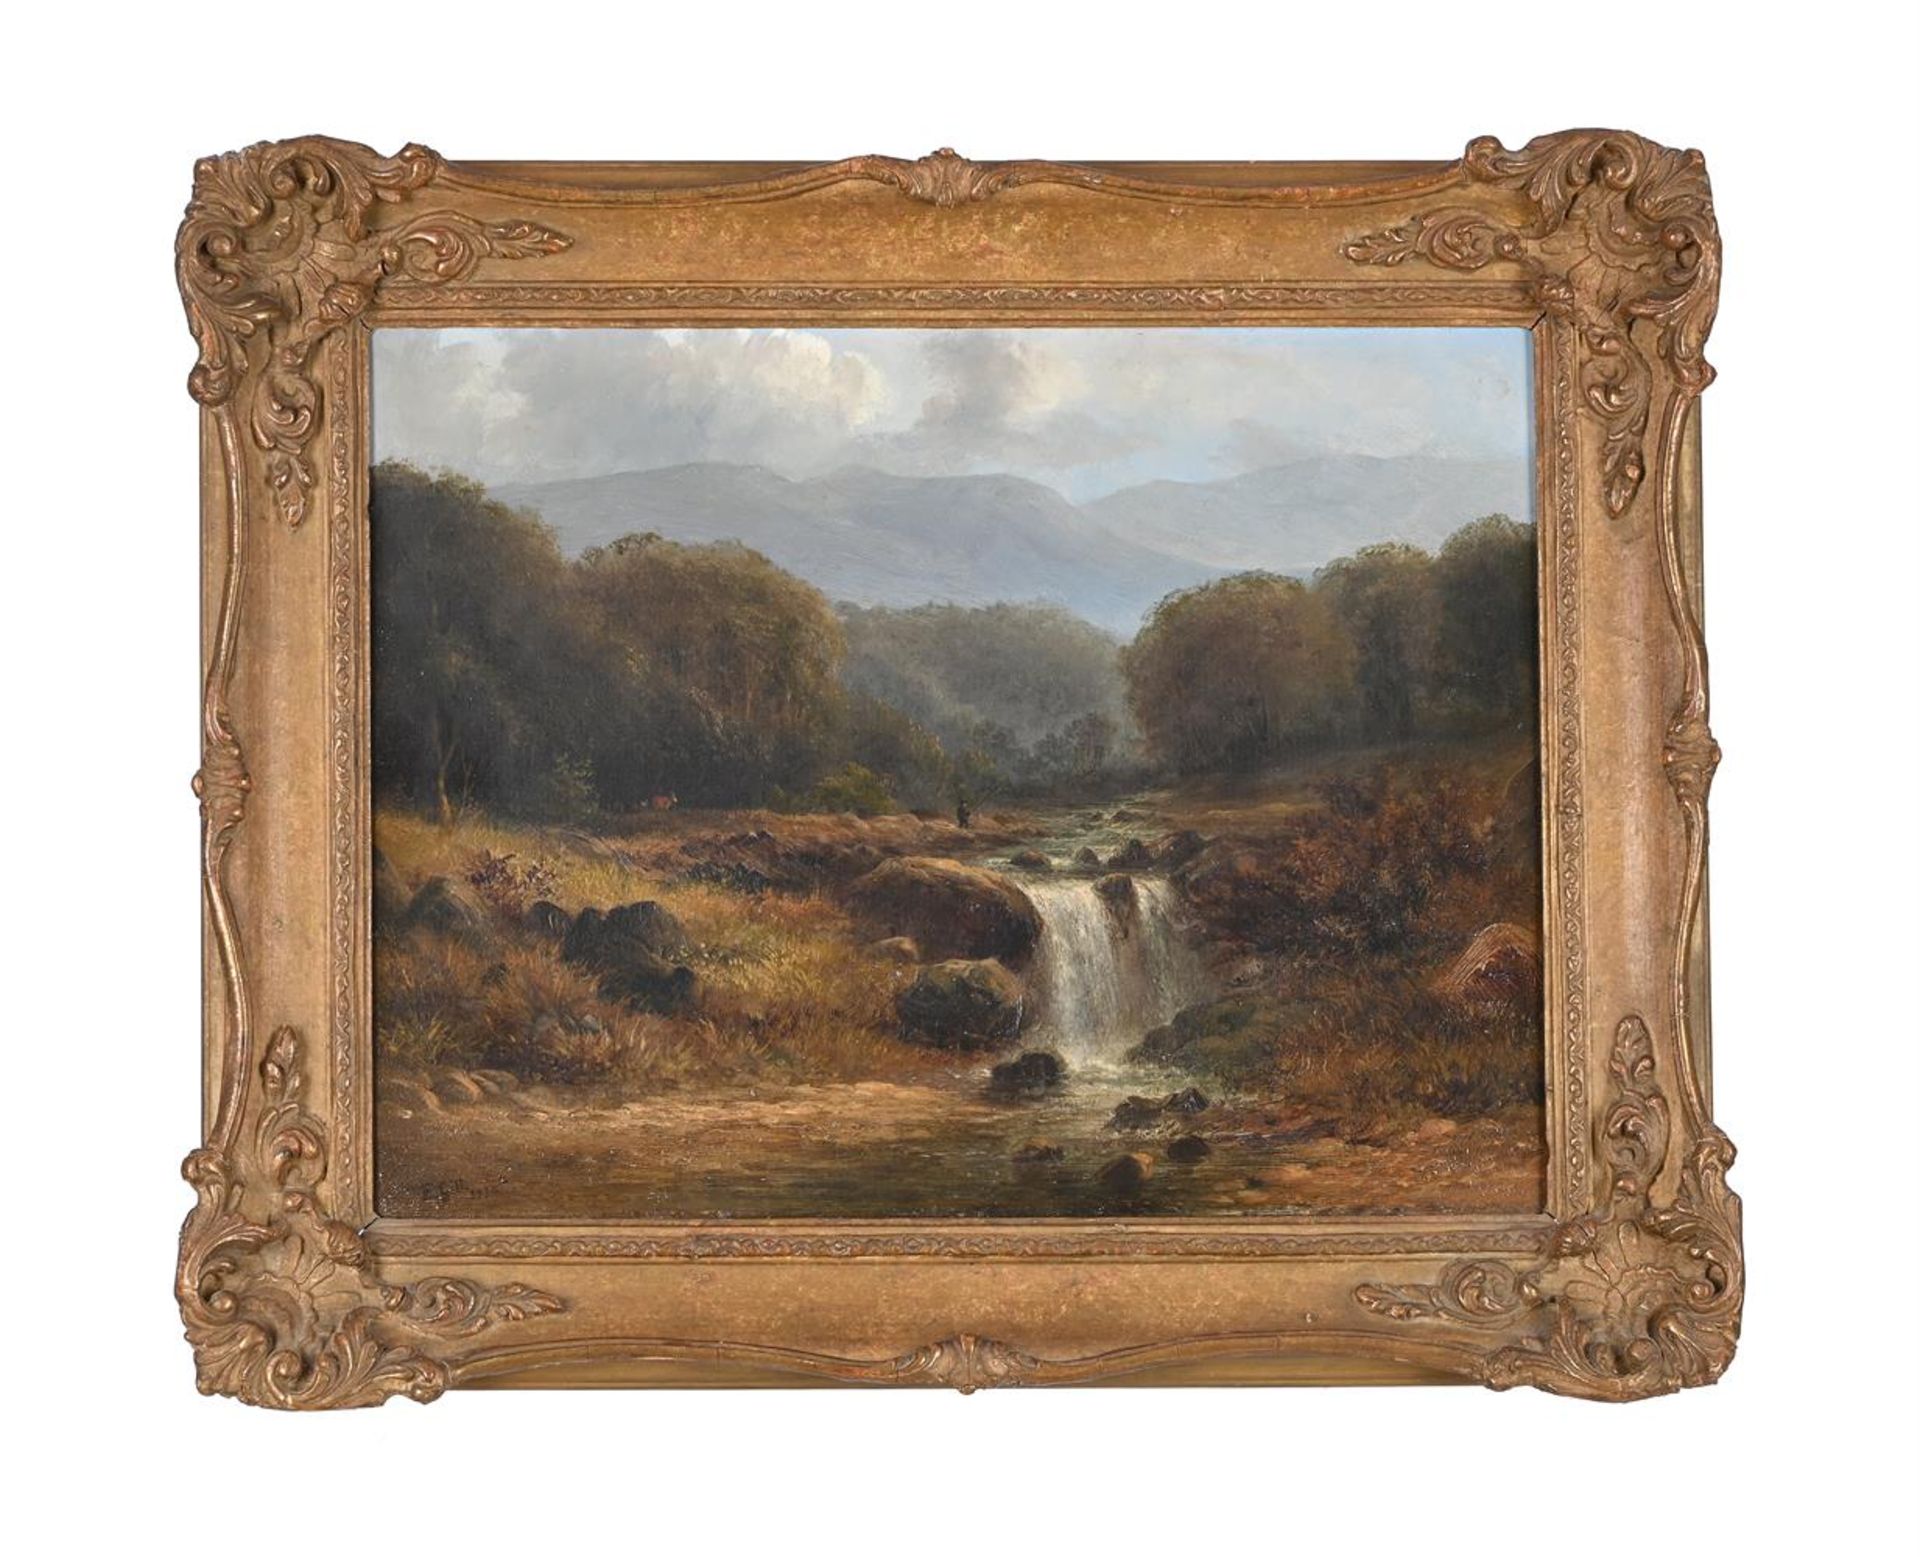 EDMUND GILL (BRITISH 1820-1894), WATERFALL ON THE UPPER REACHES OF THE CLYDE